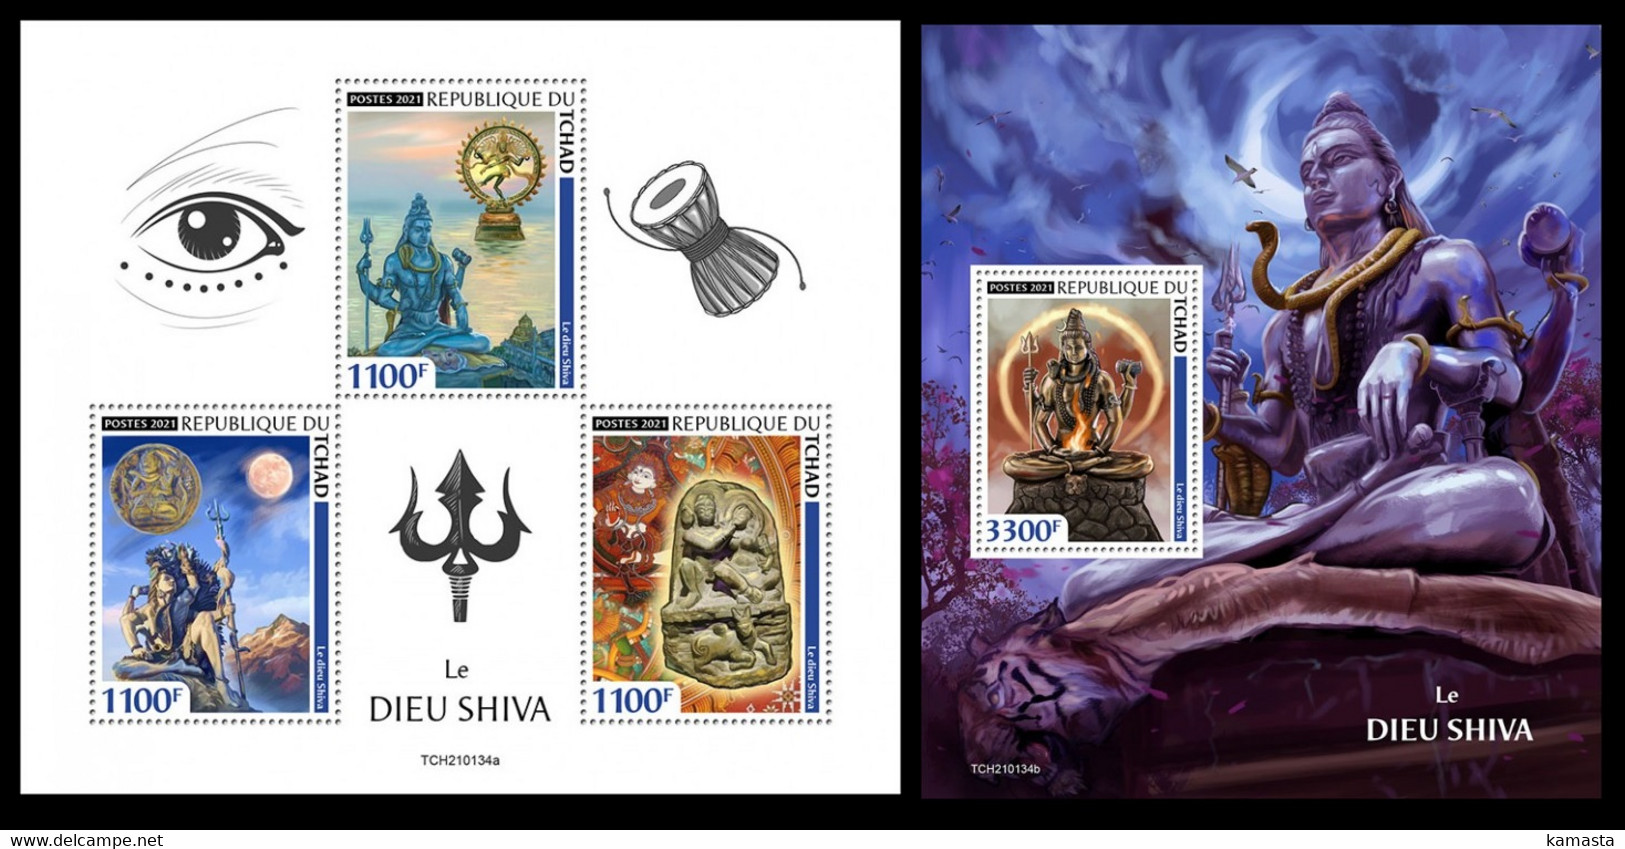 Chad 2021 God Shiva. (134) OFFICIAL ISSUE - Induismo